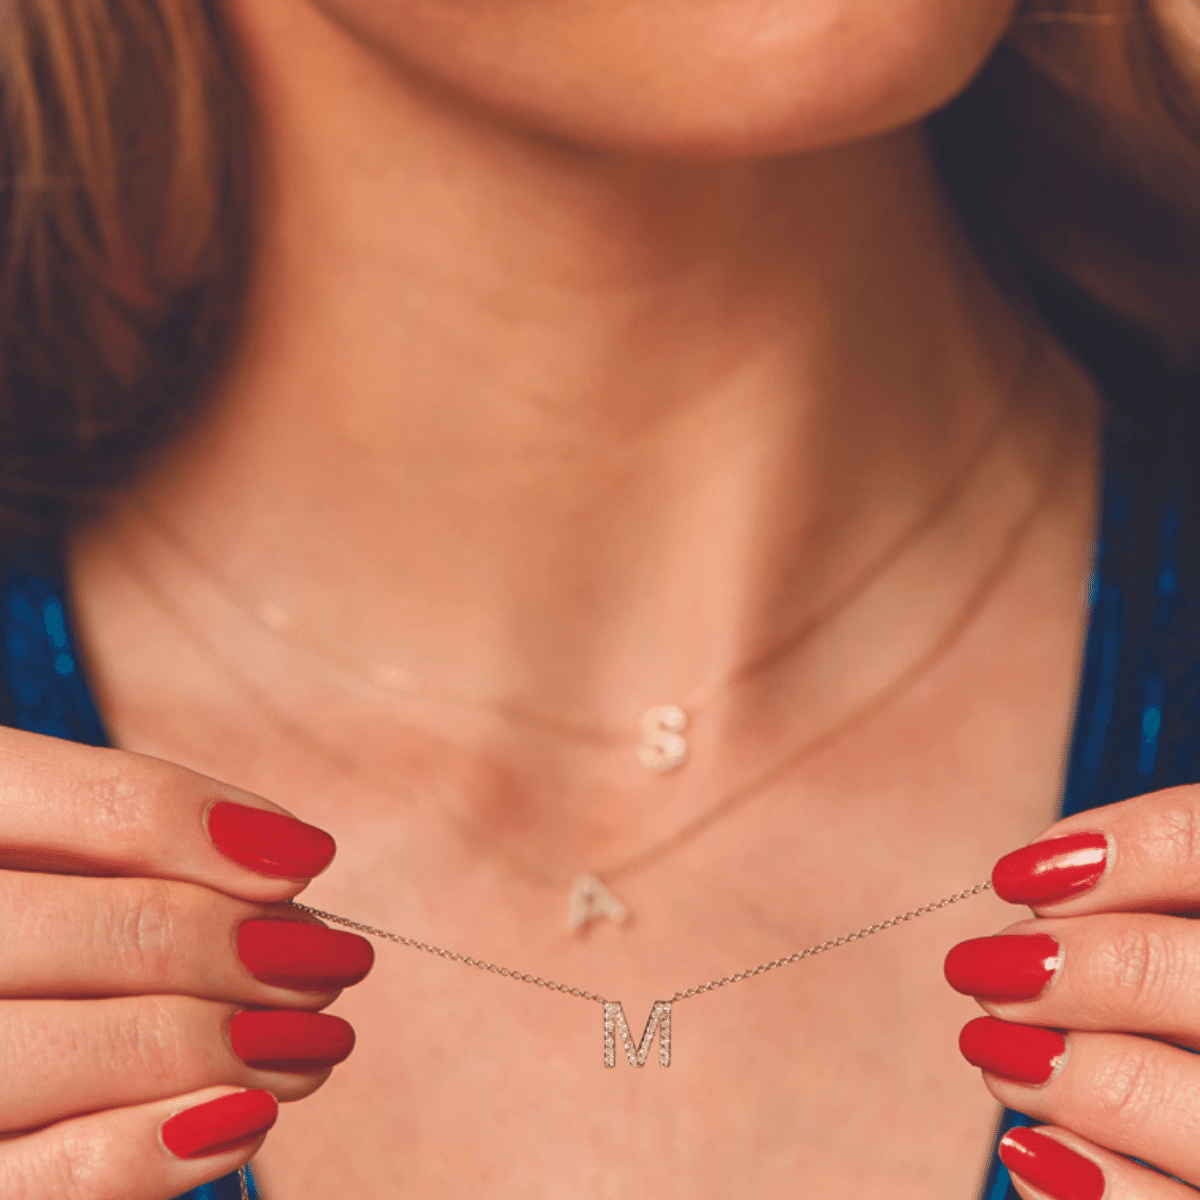 9ct White Gold Diamond Initial 'T' Necklace